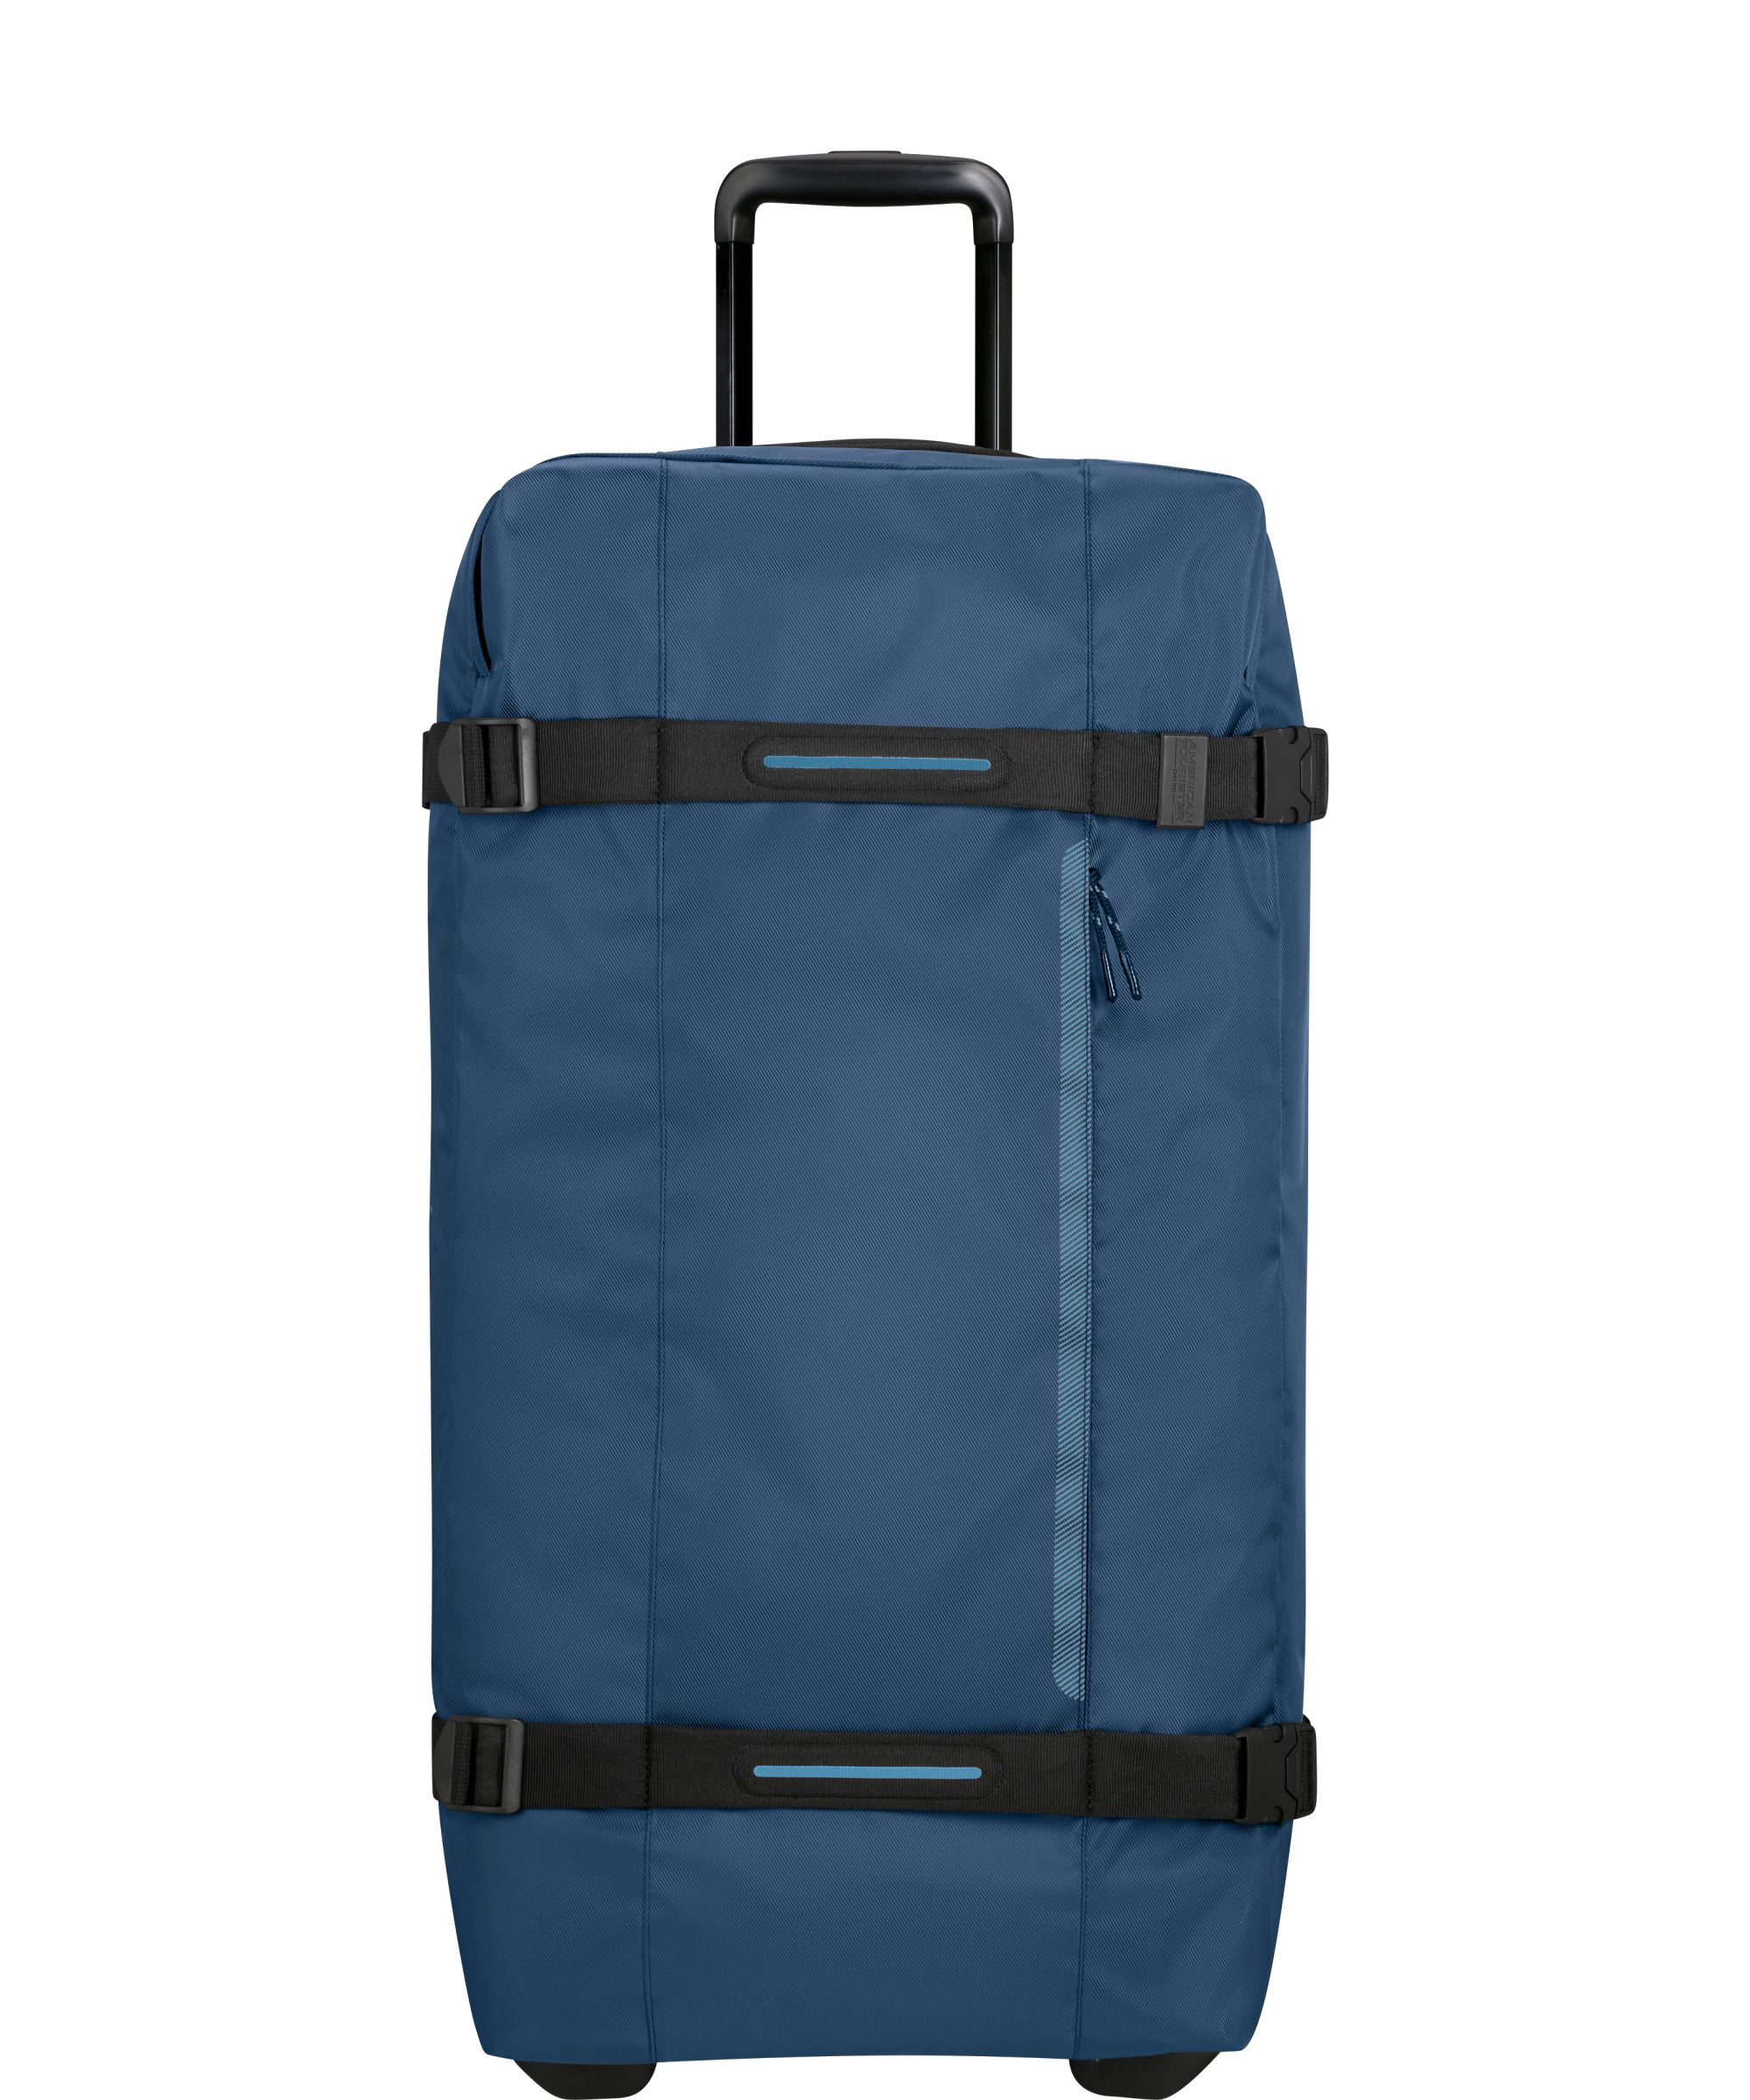 Bags, Luggage & Travel Products | Argos